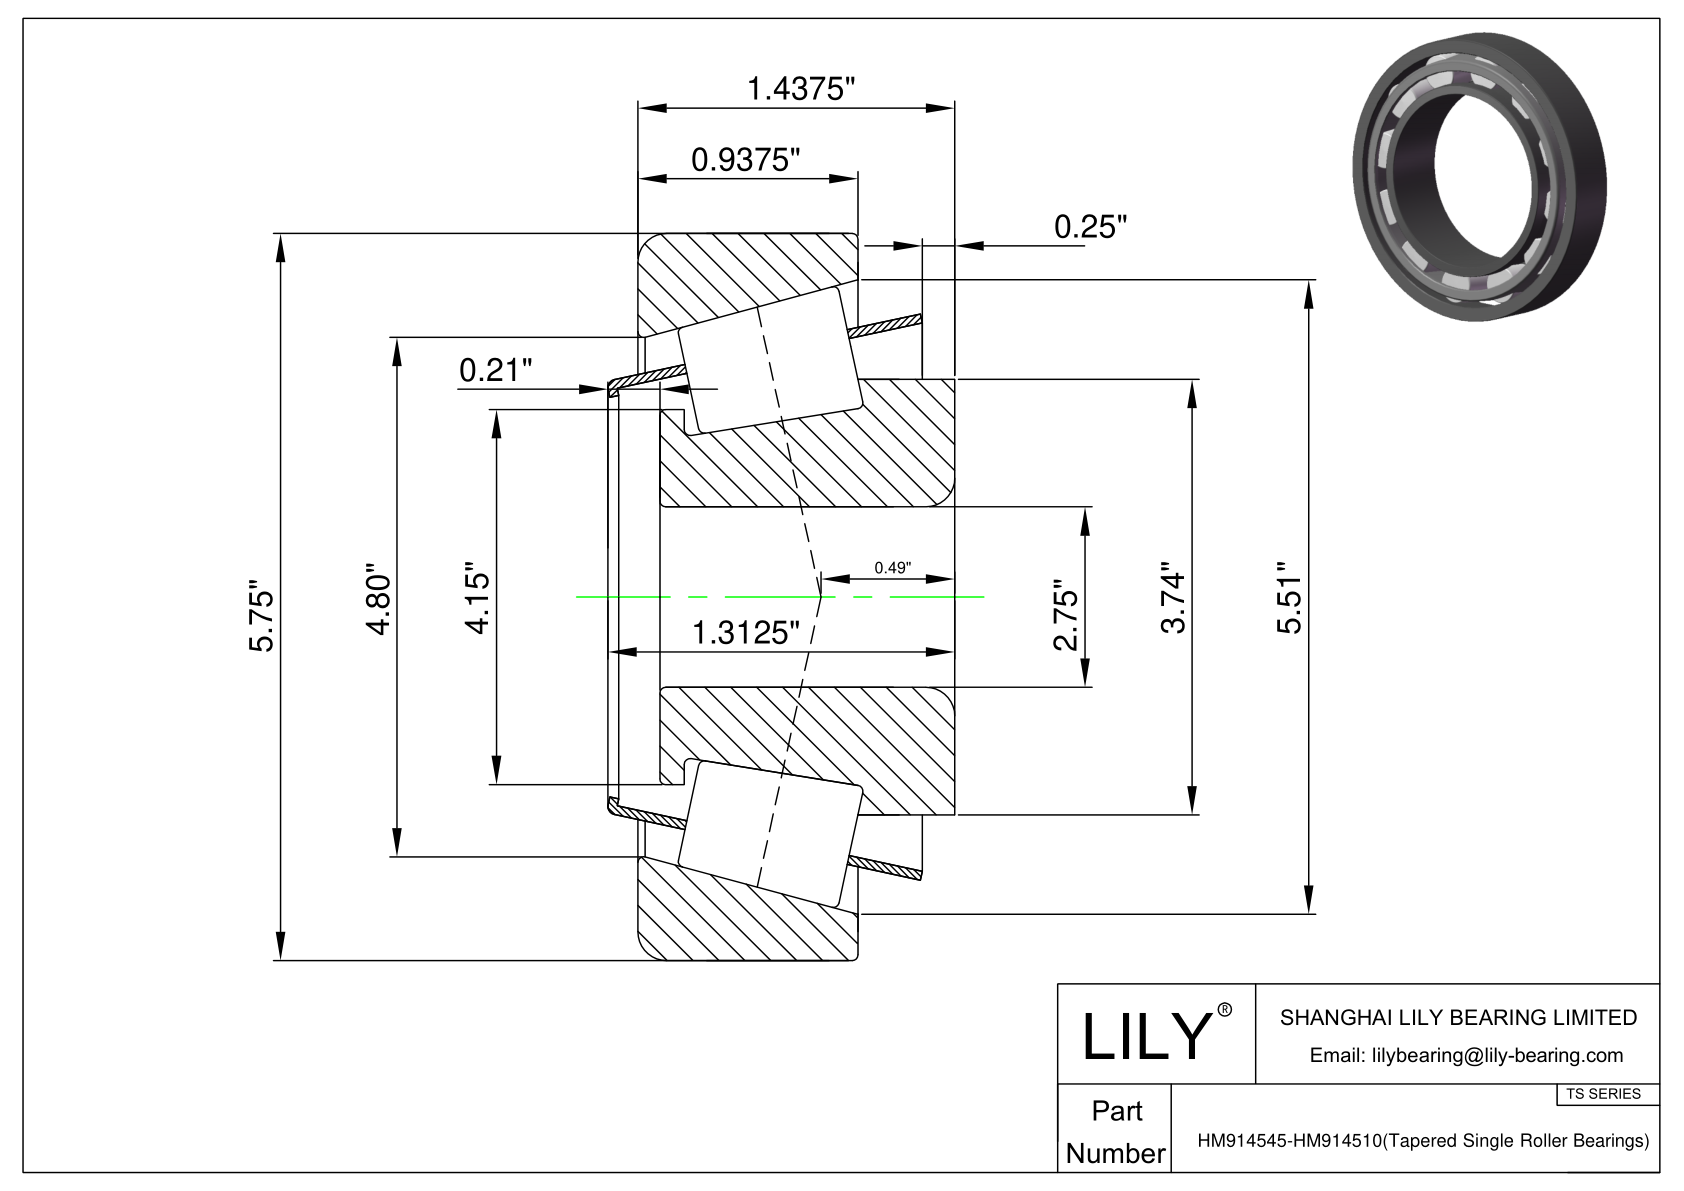 HM914545-HM914510 TS (Tapered Single Roller Bearings) (Imperial) cad drawing